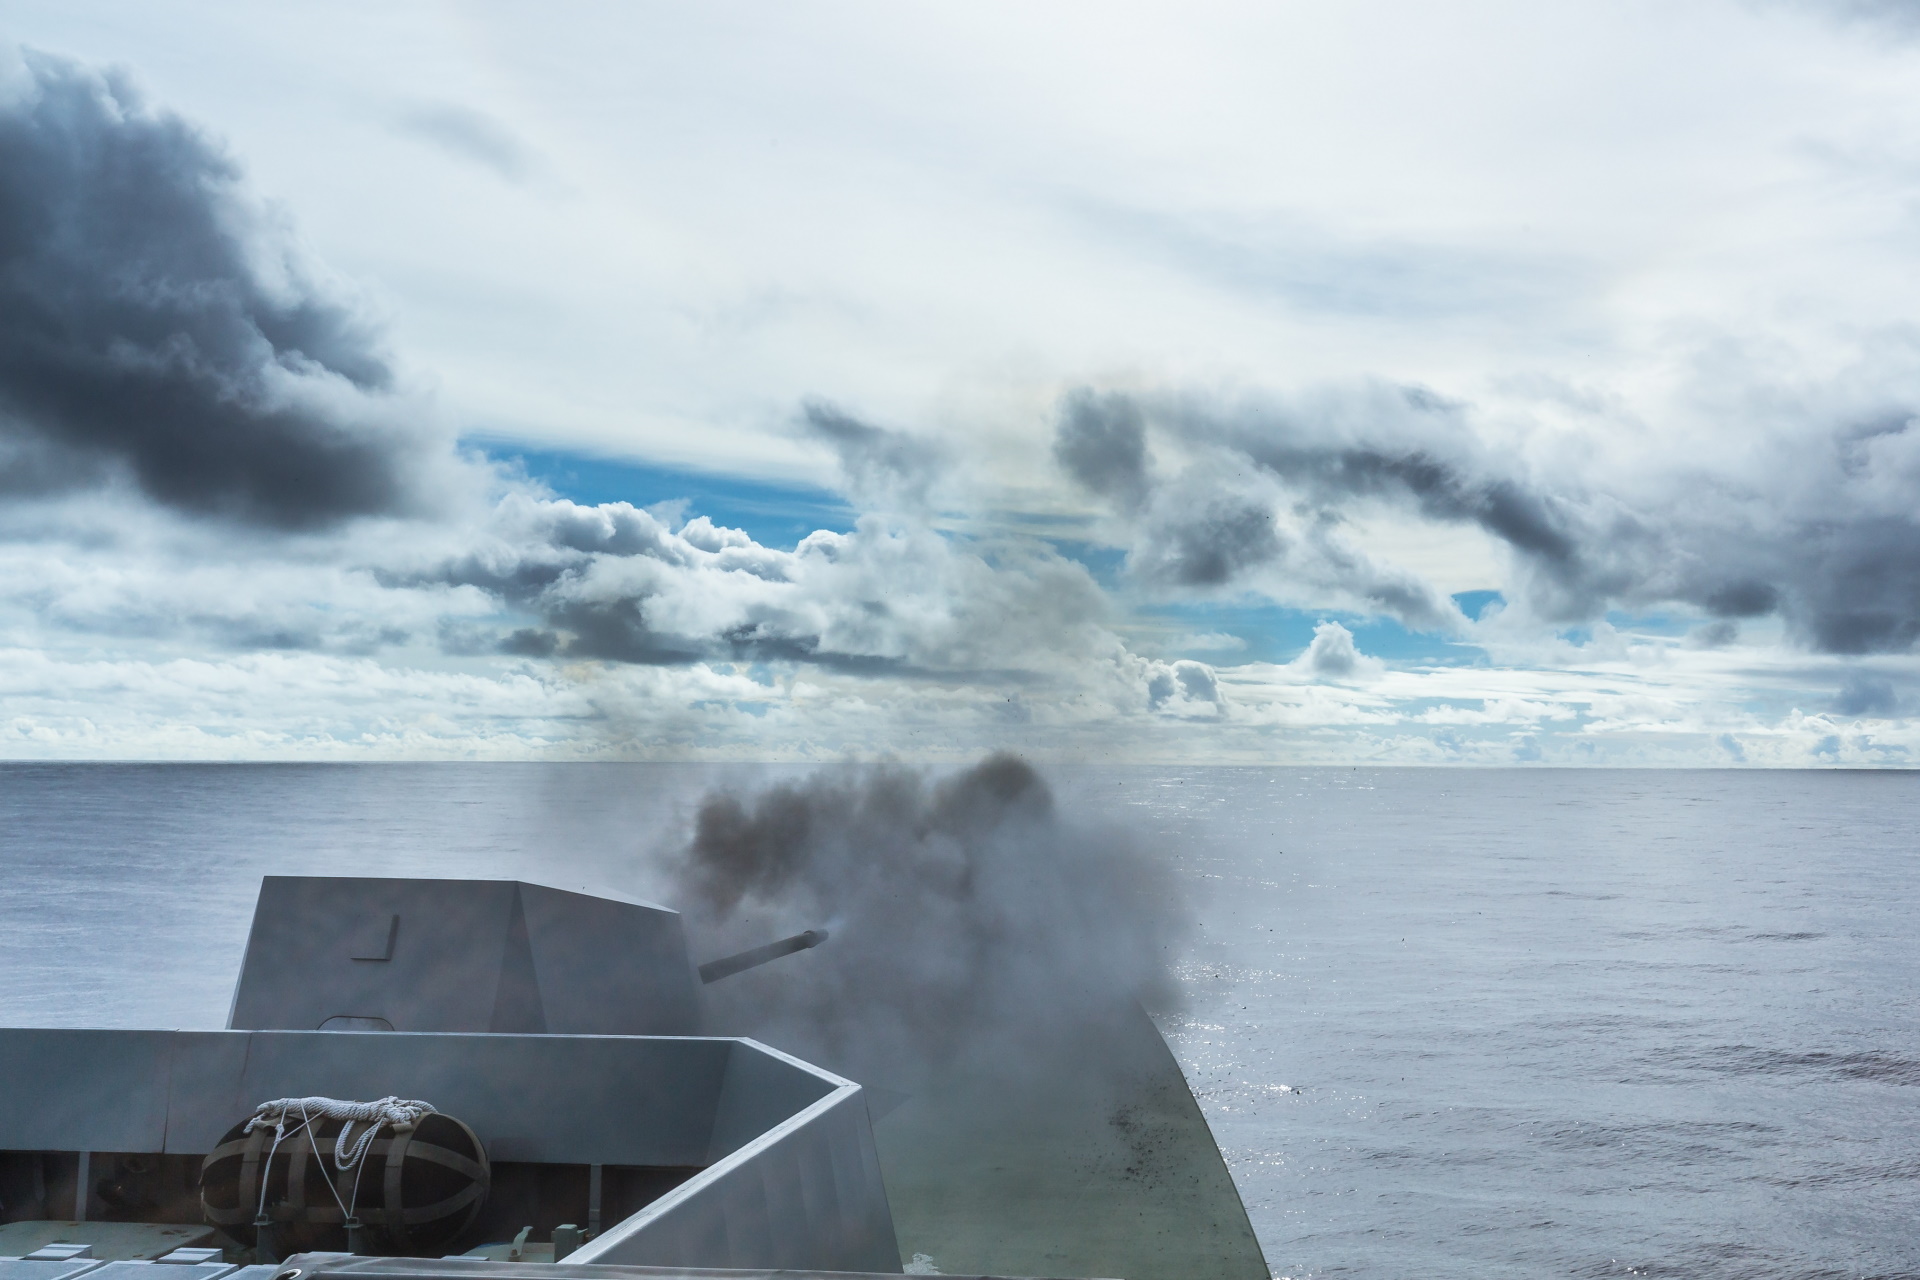 RSS Supreme and KDB Darulehsan conducting a coordinated gunnery firing during the exercise.